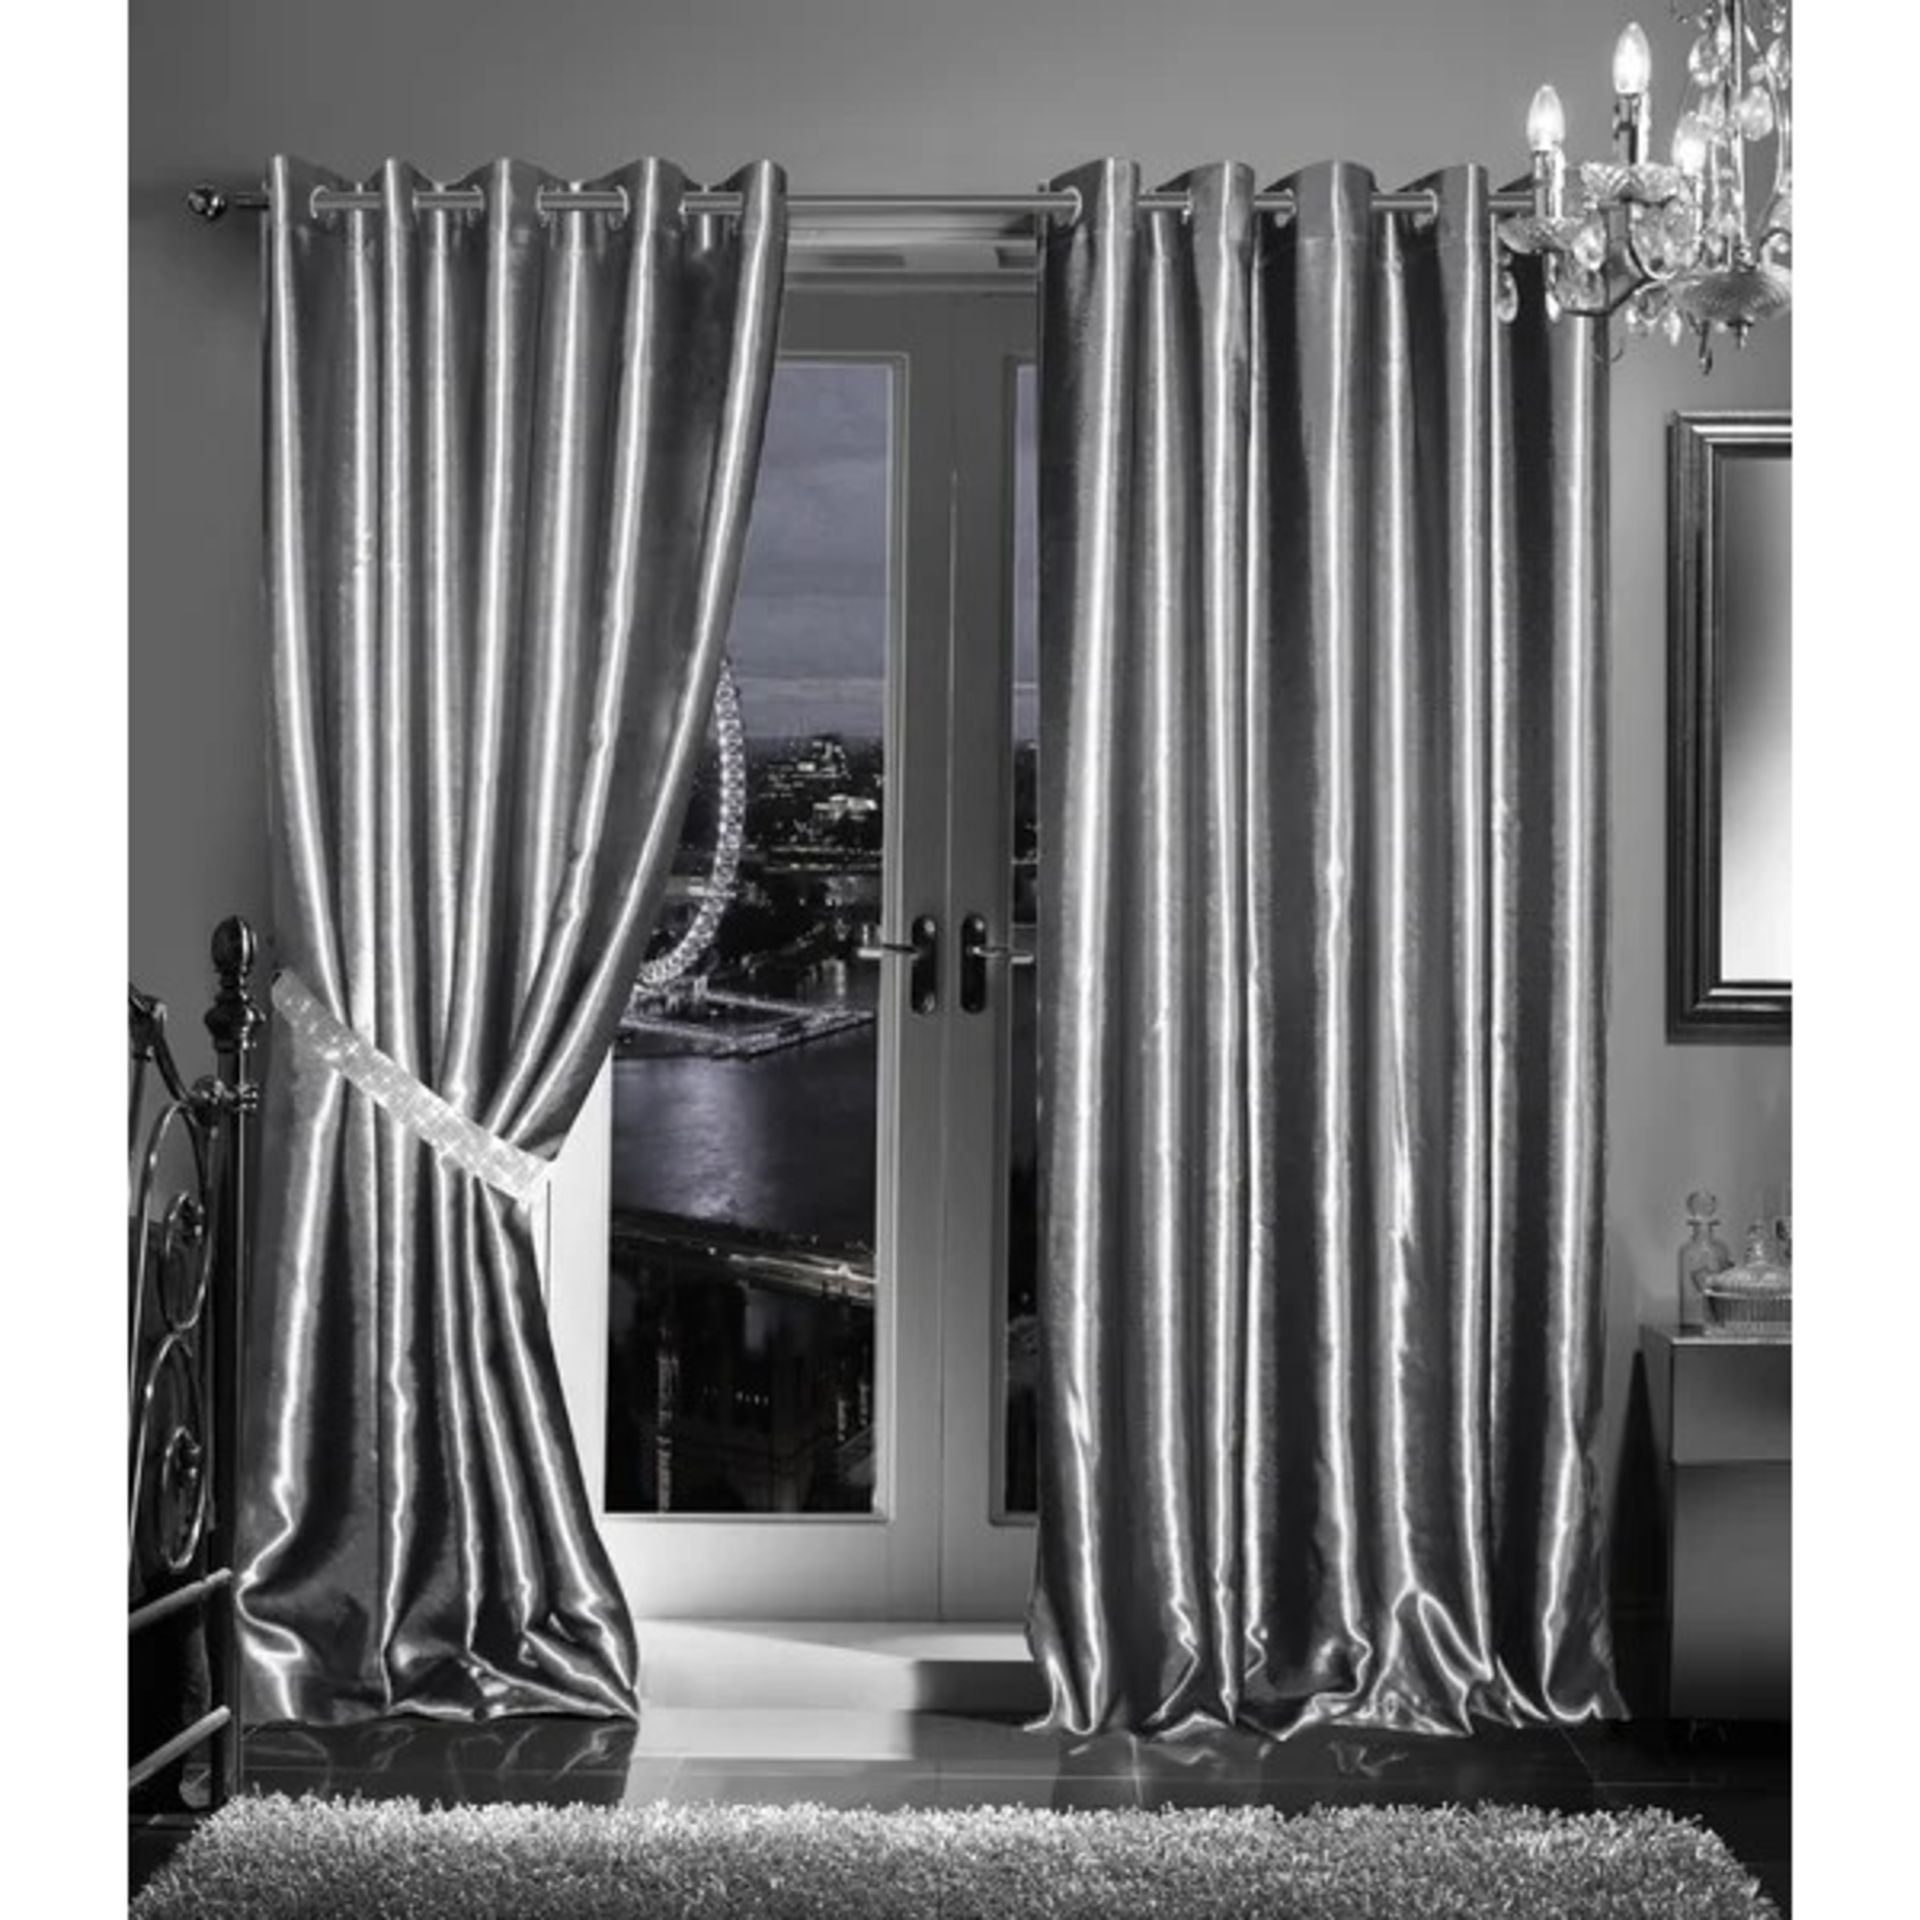 RRP £45.00 - Kimmswick Eyelet Blackout Thermal Curtains - Silver, Panel Size: Width 116 x Drop 182